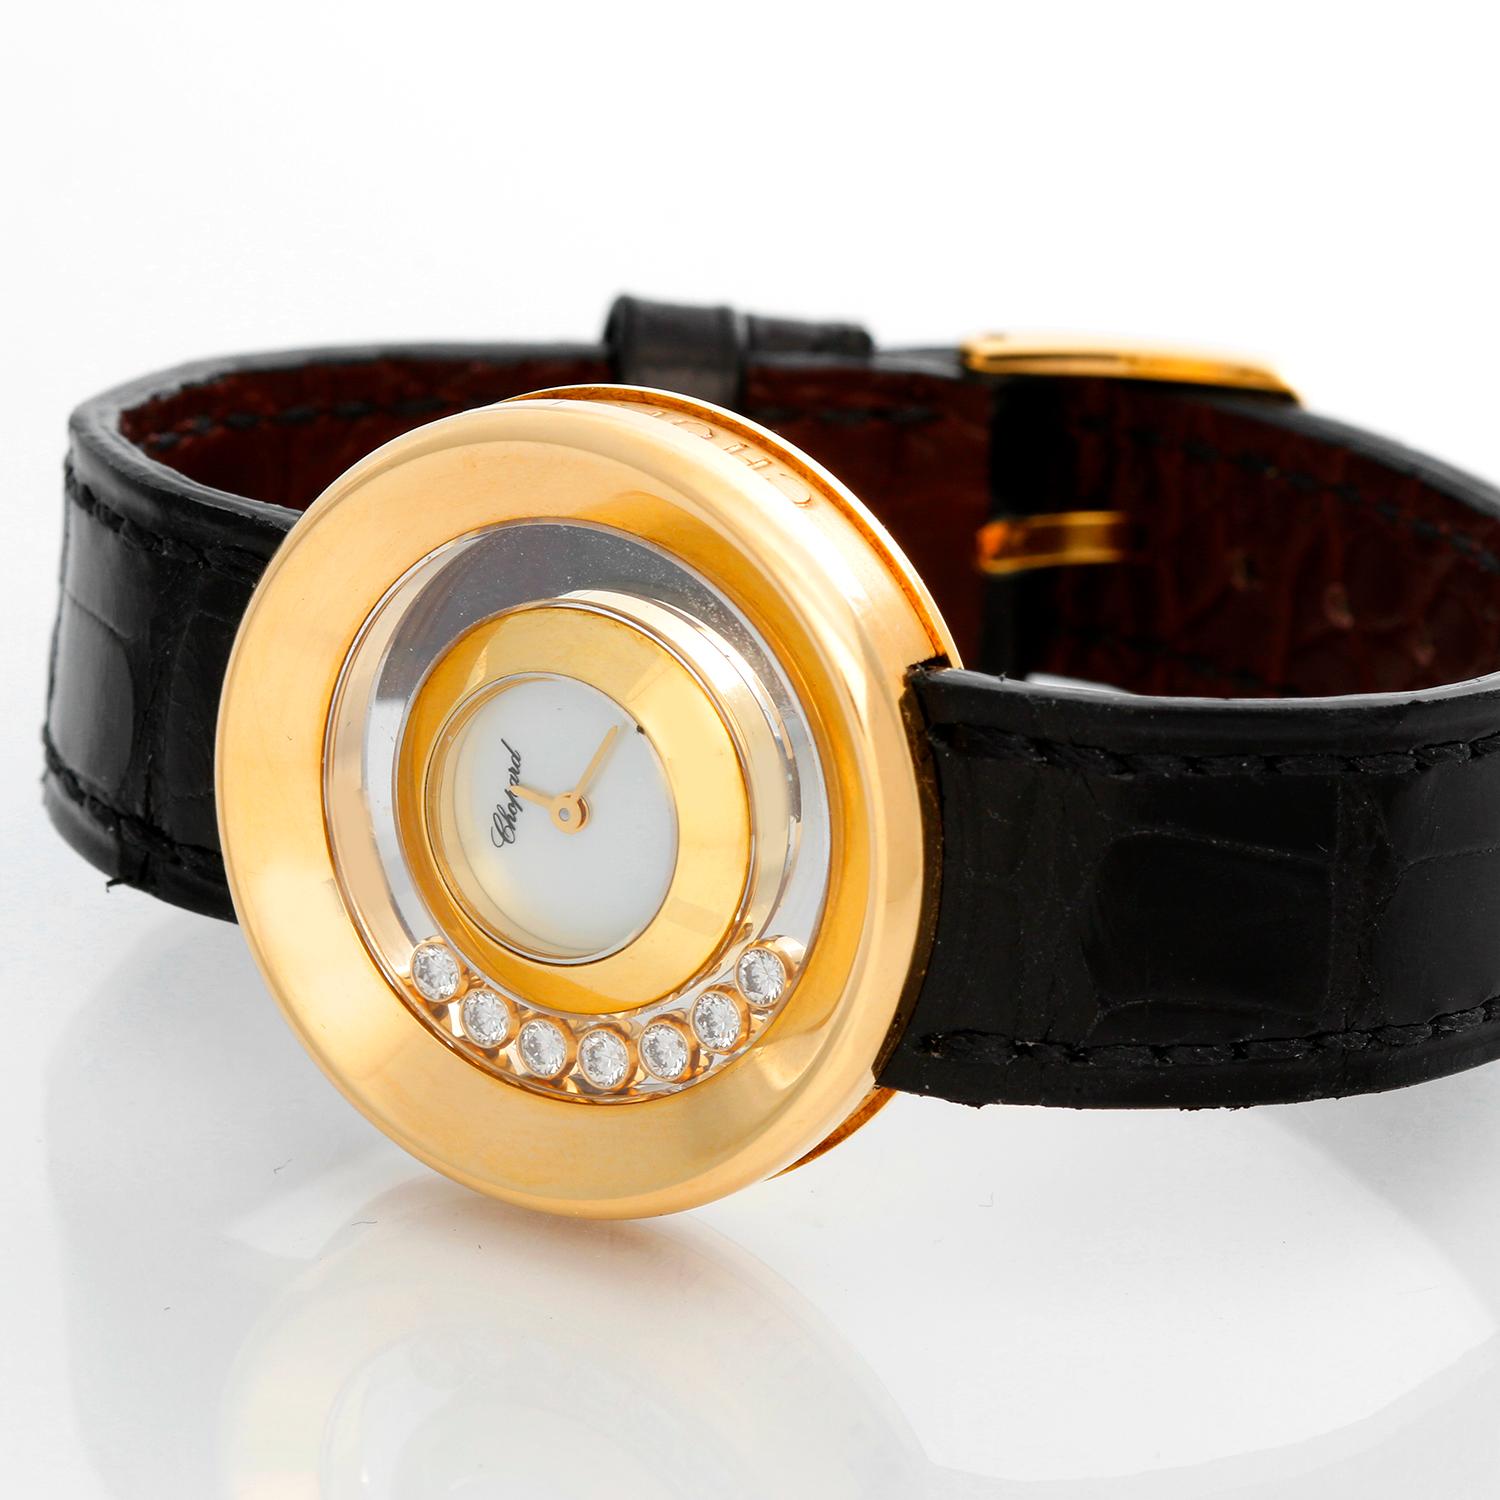 Chopard Happy Diamonds 18K Yellow Gold Ladies Watch - Quartz. 18K yellow gold case with 7 floating diamonds (31mm). Mother of pearl dial . Black strap with tang buckle . Pre-owned with custom box